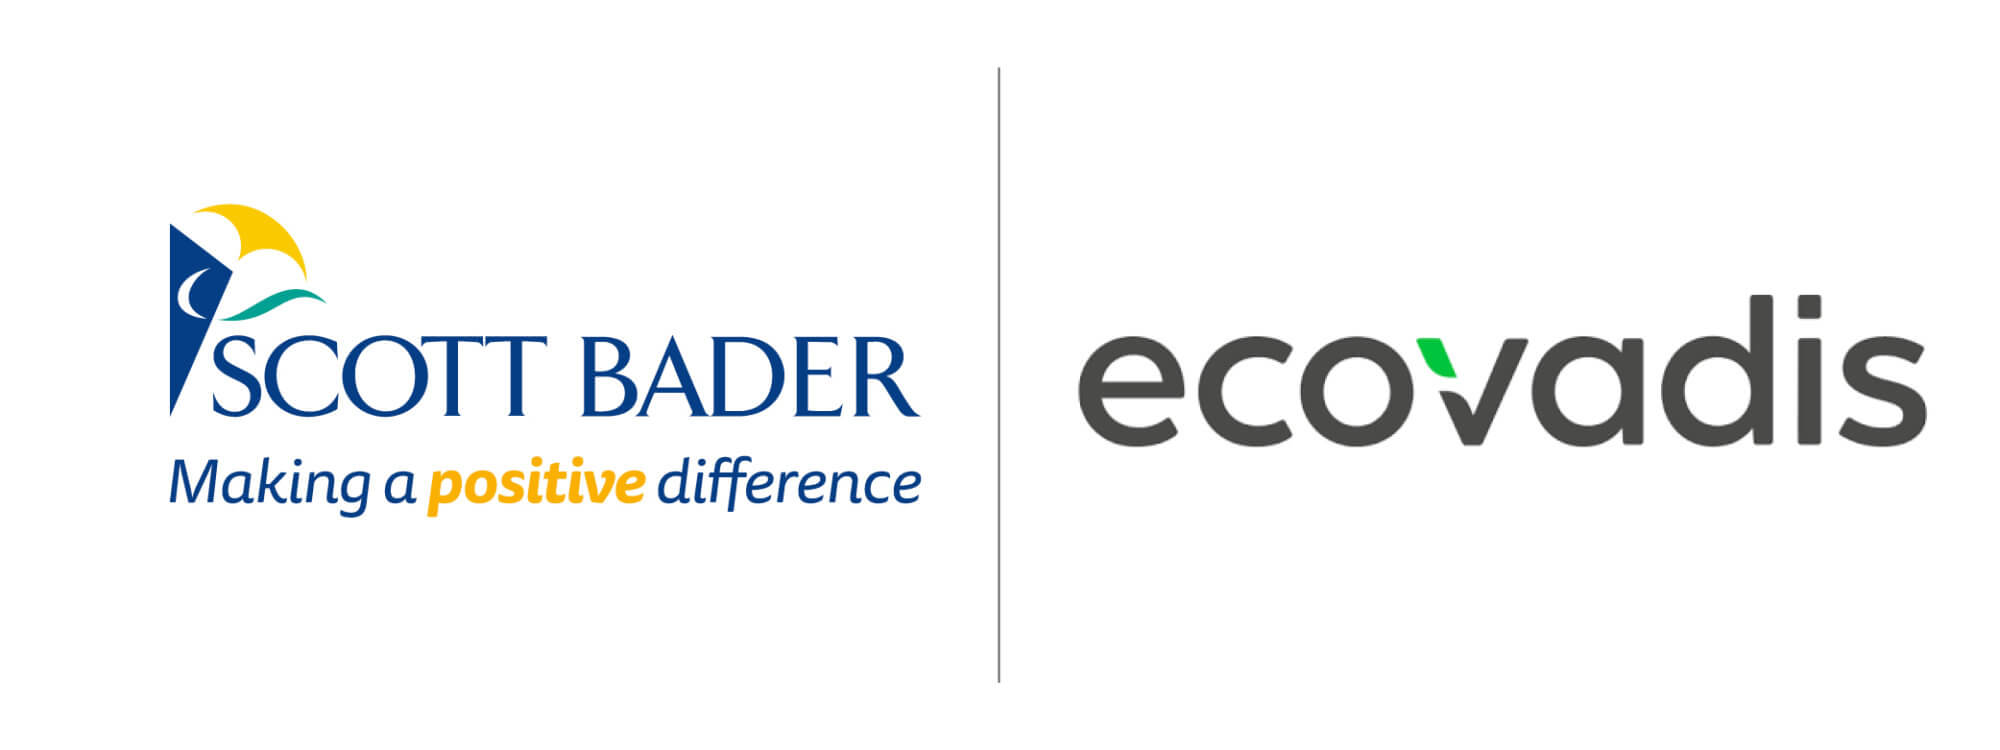 Scott Bader partners with EcoVadis to drive sustainable procurement innovation and excellence across the value chain